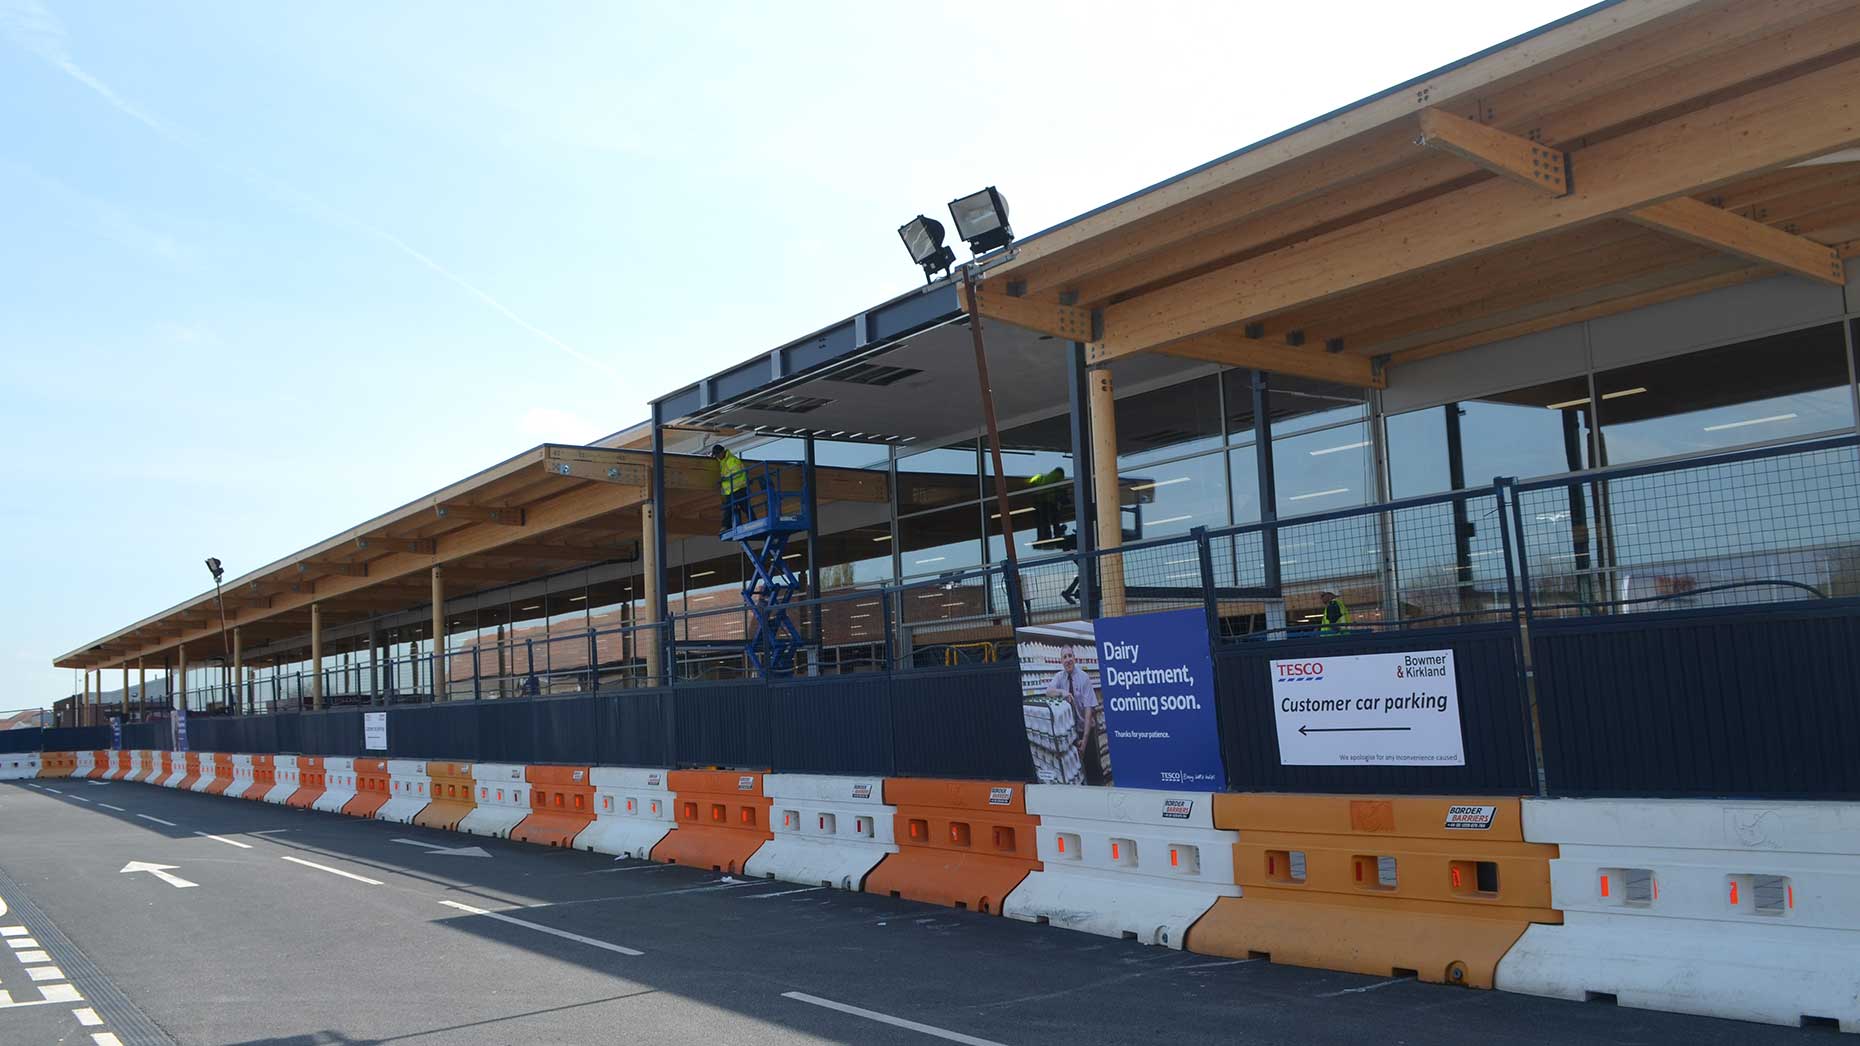 The larger building for the new Tesco in uphill Lincoln.